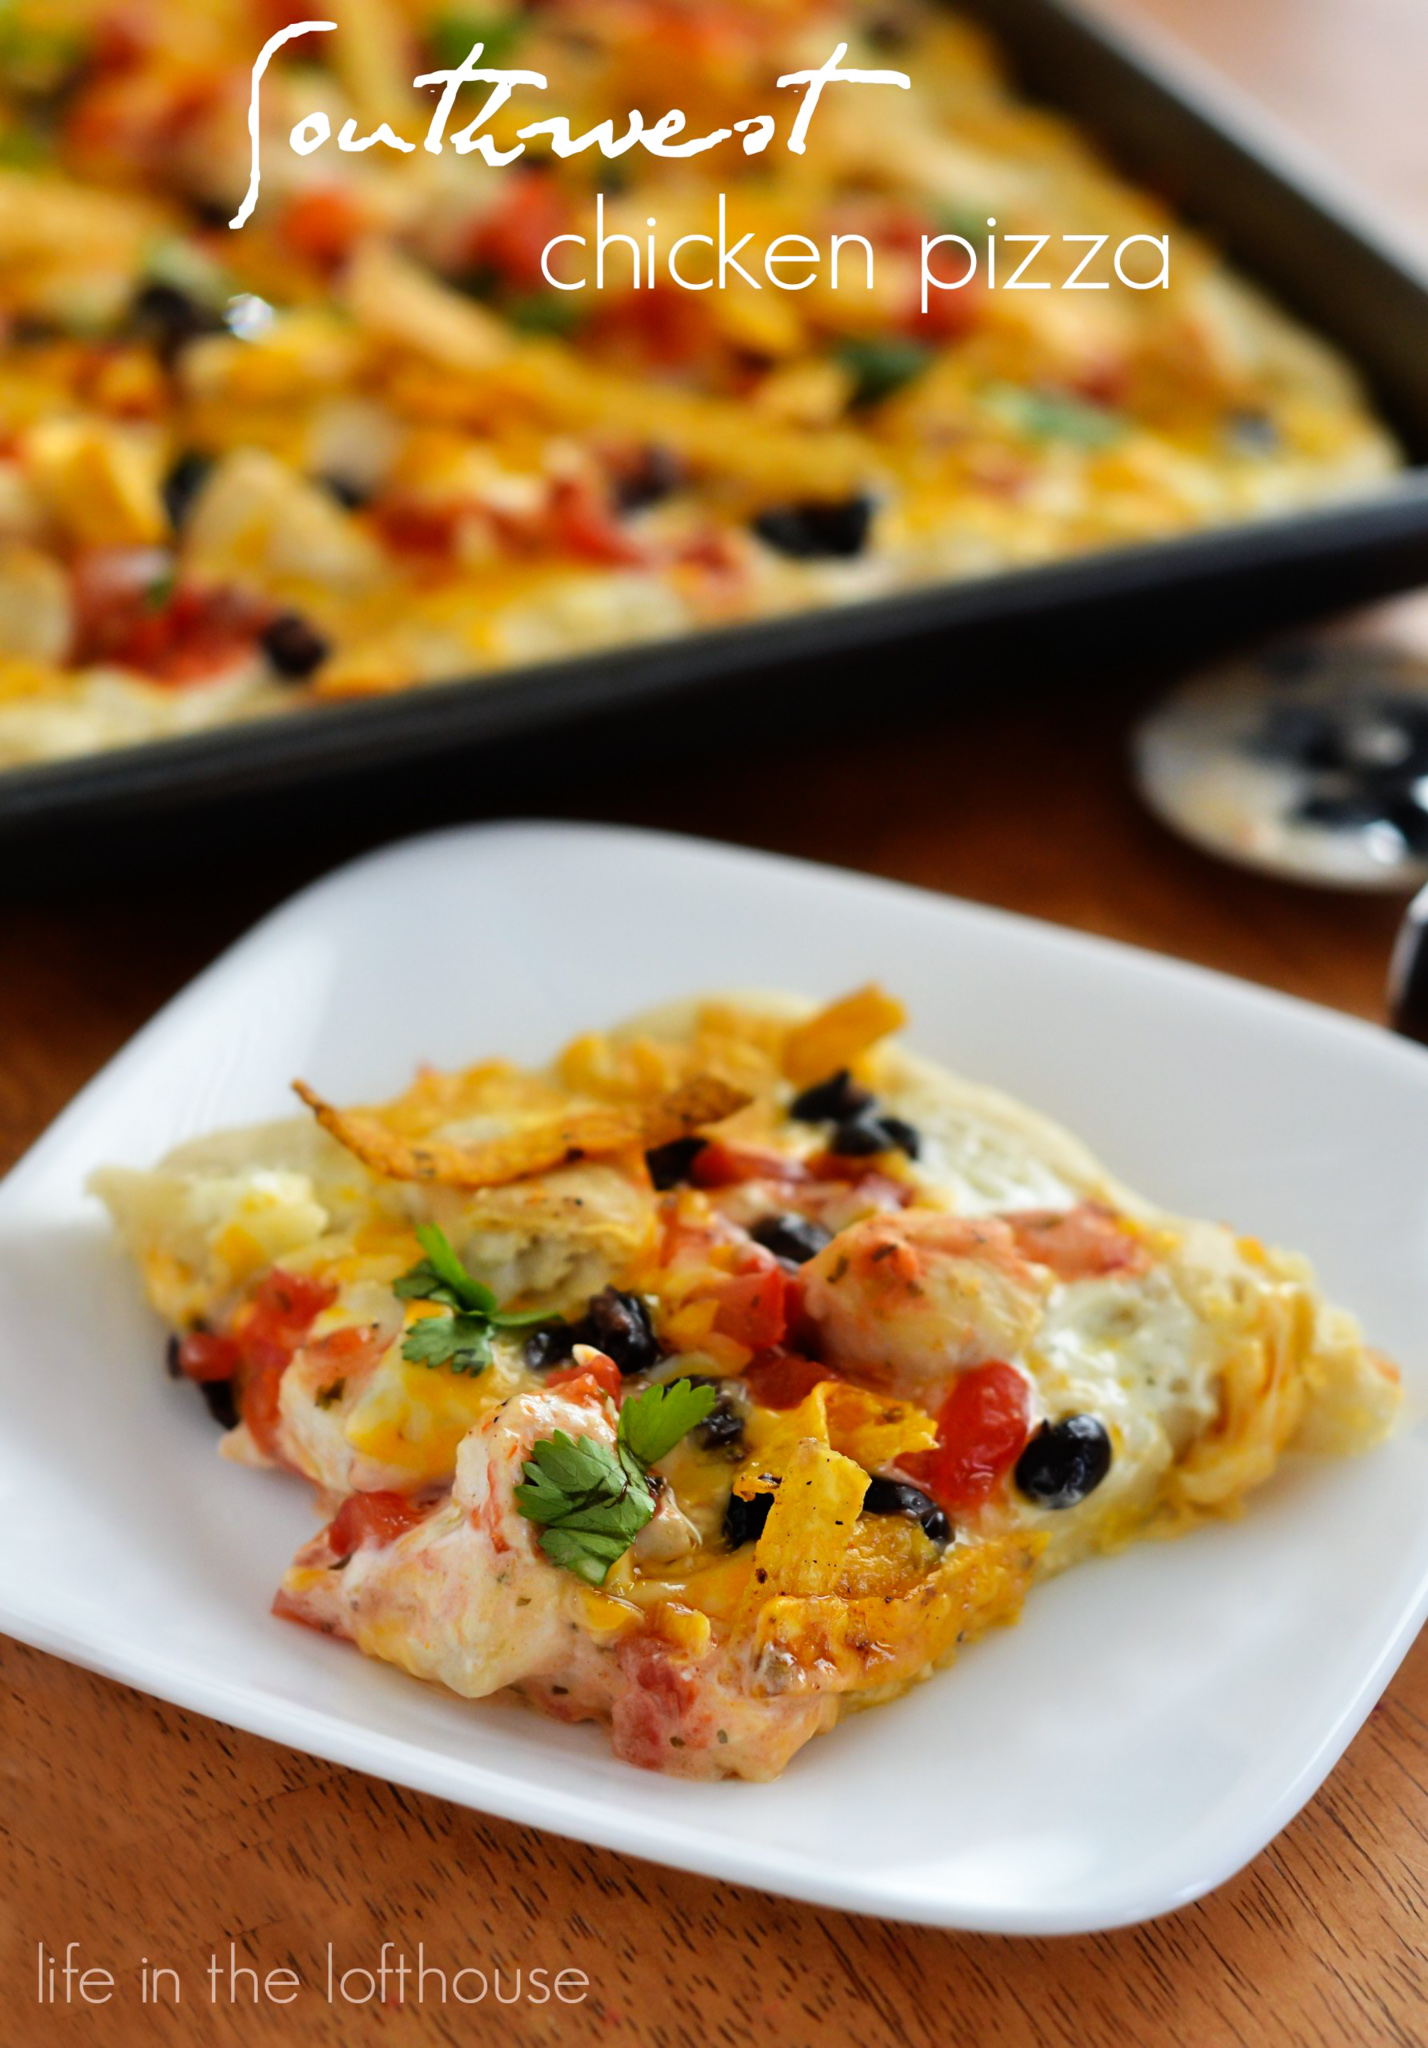 Southwest Chicken Pizza starts with ranch dressing and is topped with seasoned chicken, black beans, salsa and lots of cheese. Life-in-the-Lofthouse.com